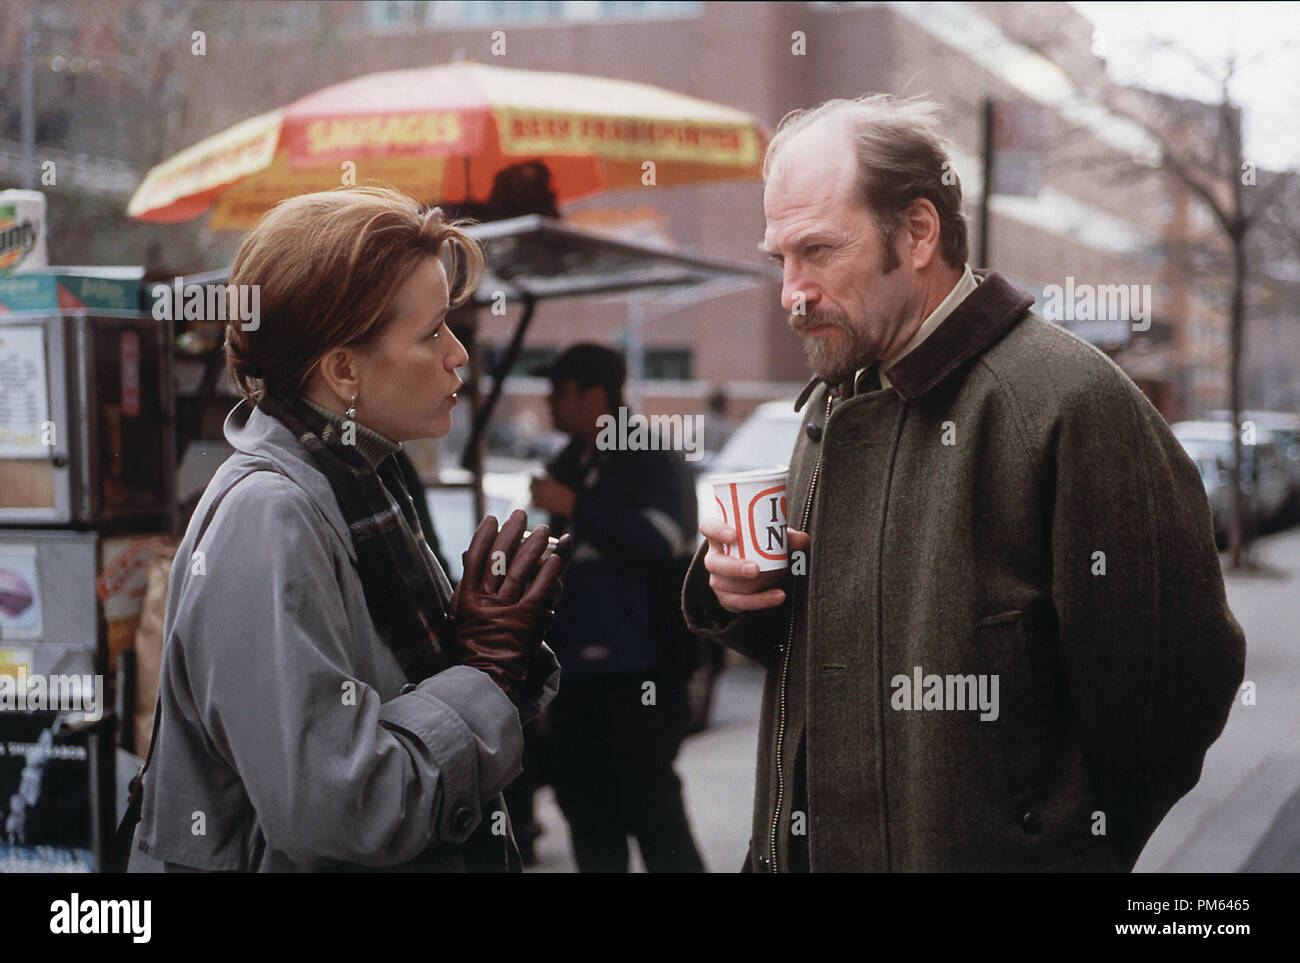 Film Still / Publicity Stills from 'Wonderland' Linda Emond, Ted Levine 2000 Photo Credit: Eric Lebowitz File Reference # 30846009THA  For Editorial Use Only -  All Rights Reserved Stock Photo